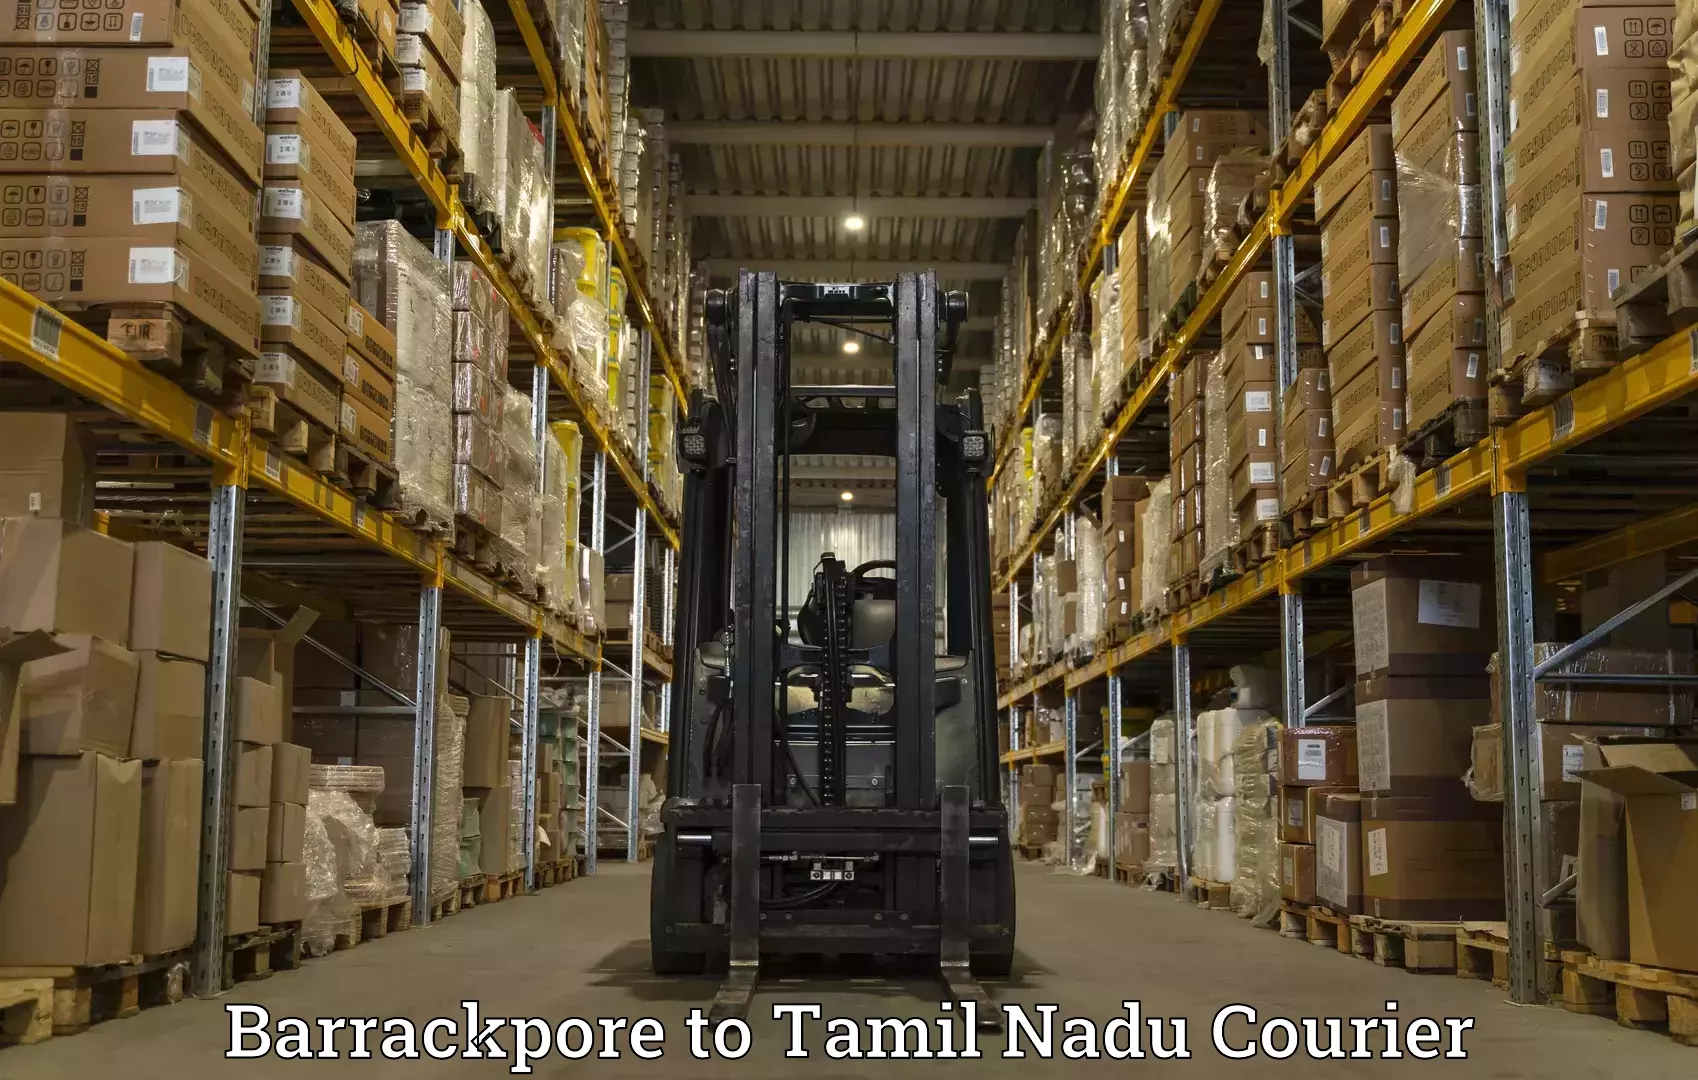 24-hour courier service Barrackpore to Mettur